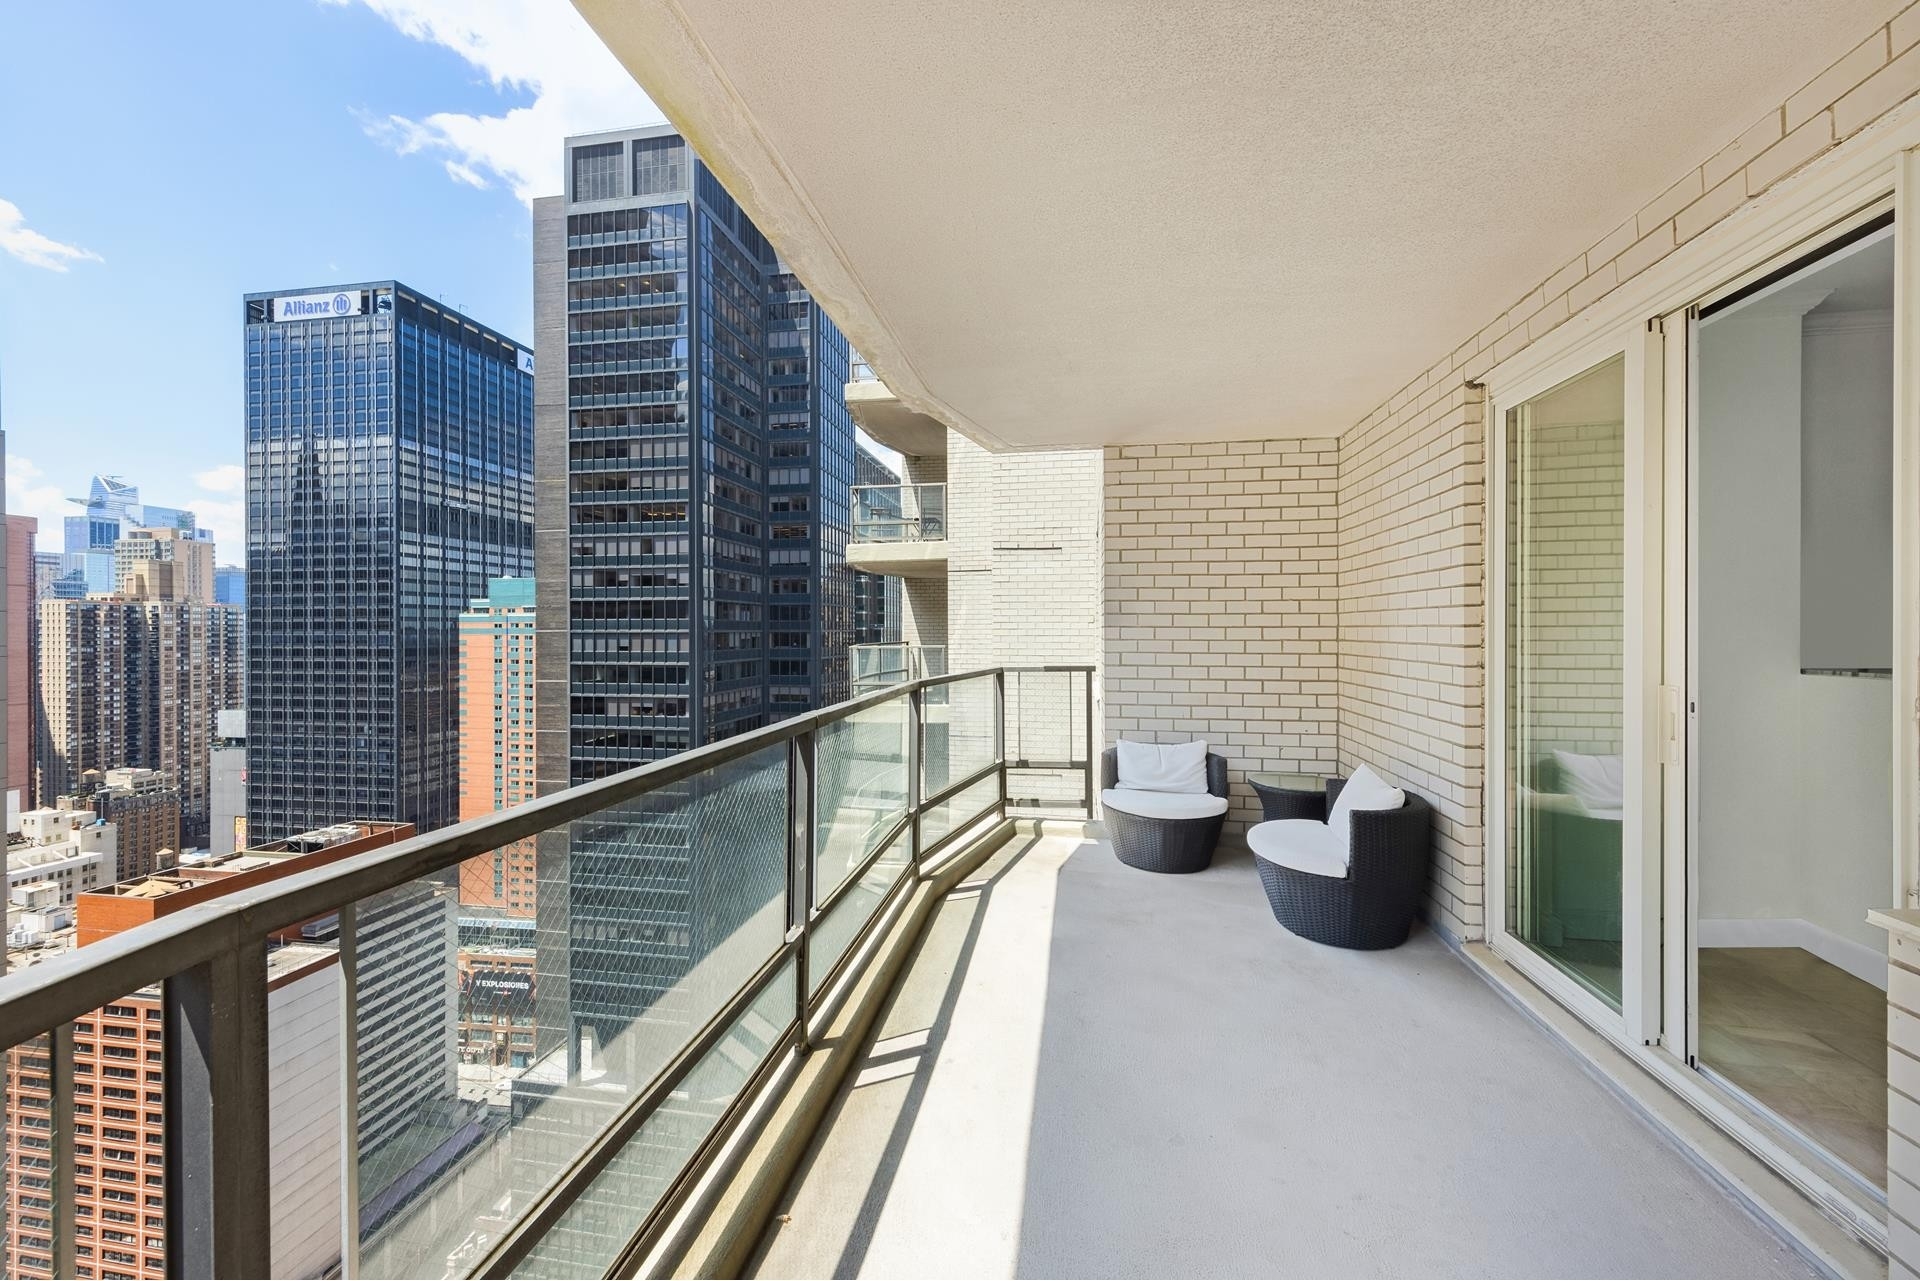 Condominium for Sale at Tower 53, 159 W 53RD ST, 36B Midtown West, New York, New York 10019